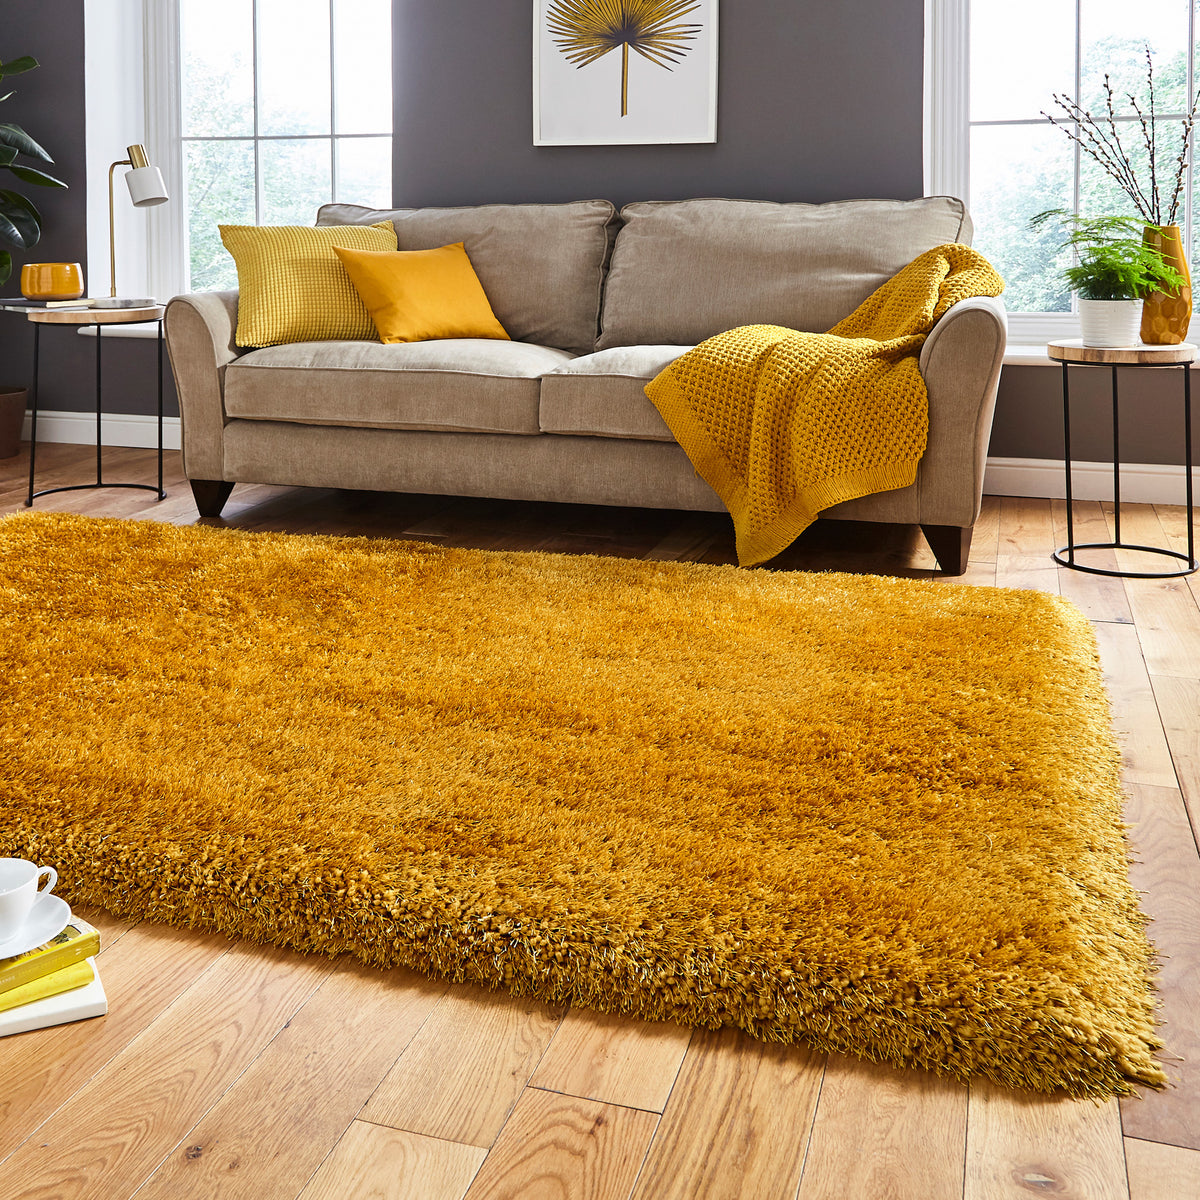 Newton Yellow Deluxe Shaggy Rug for living room